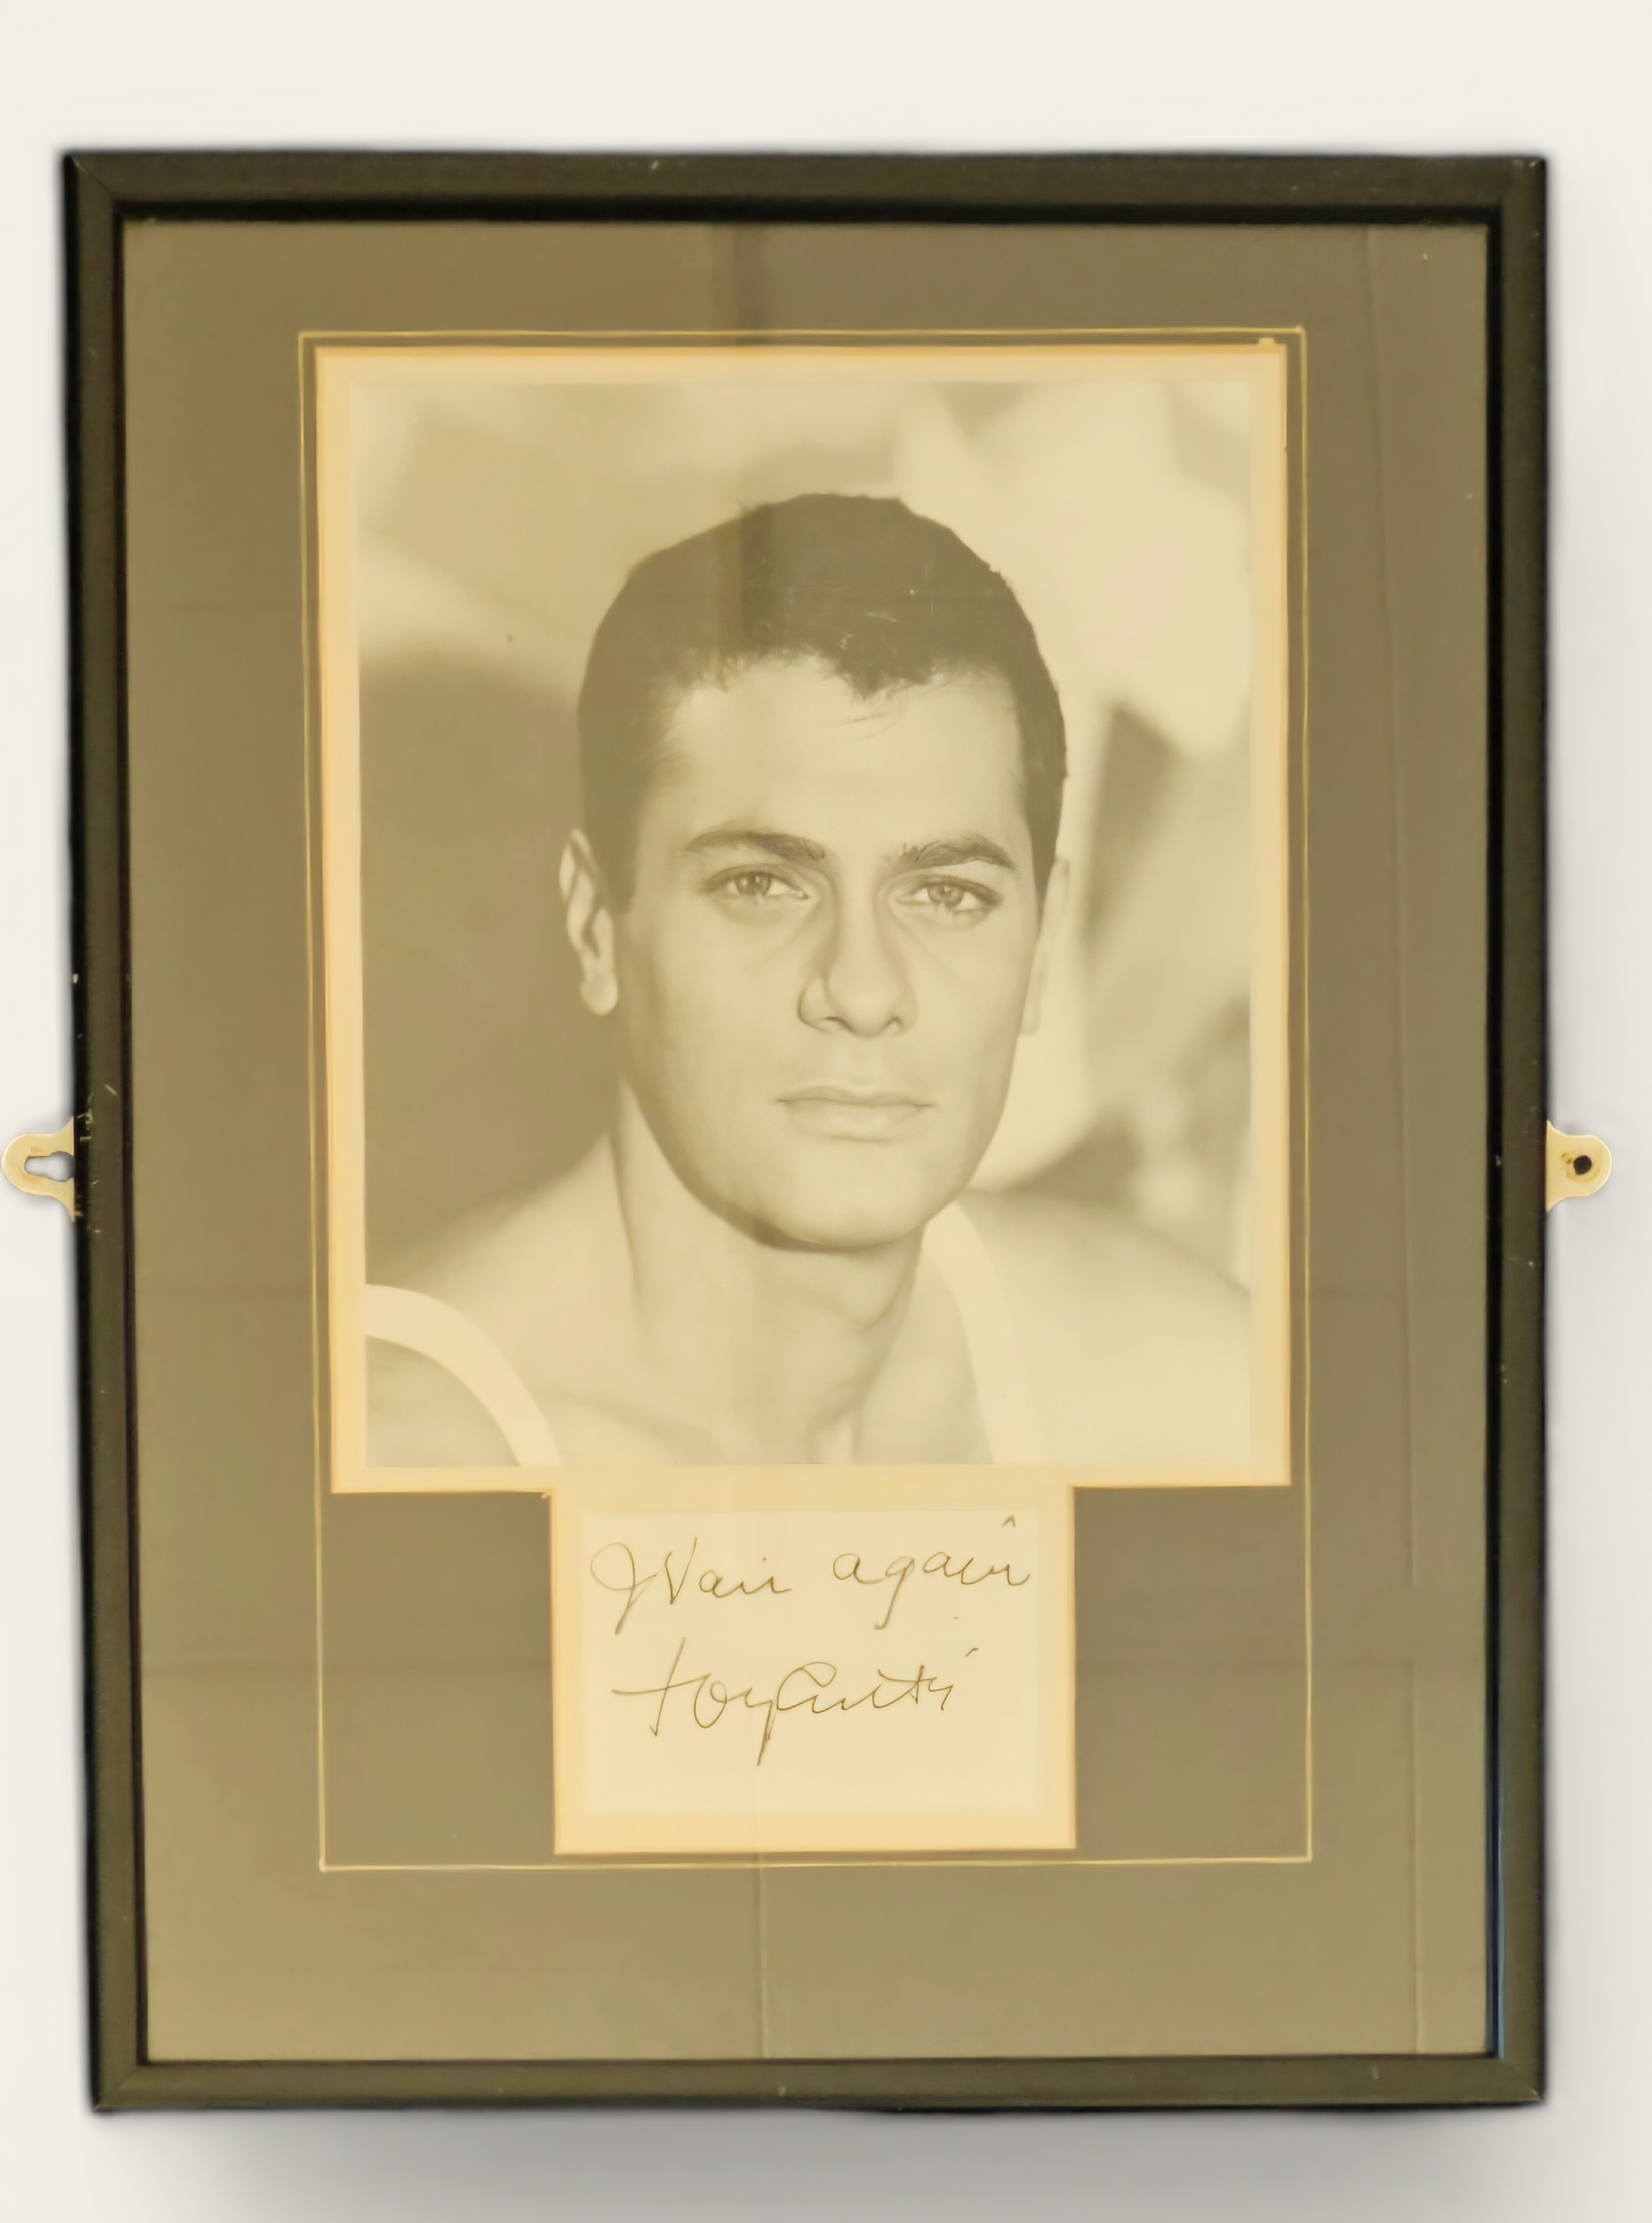 Tony Curtis signature piece, with black and white photo. Framed. Measures 11 inch by 16-inch appx.